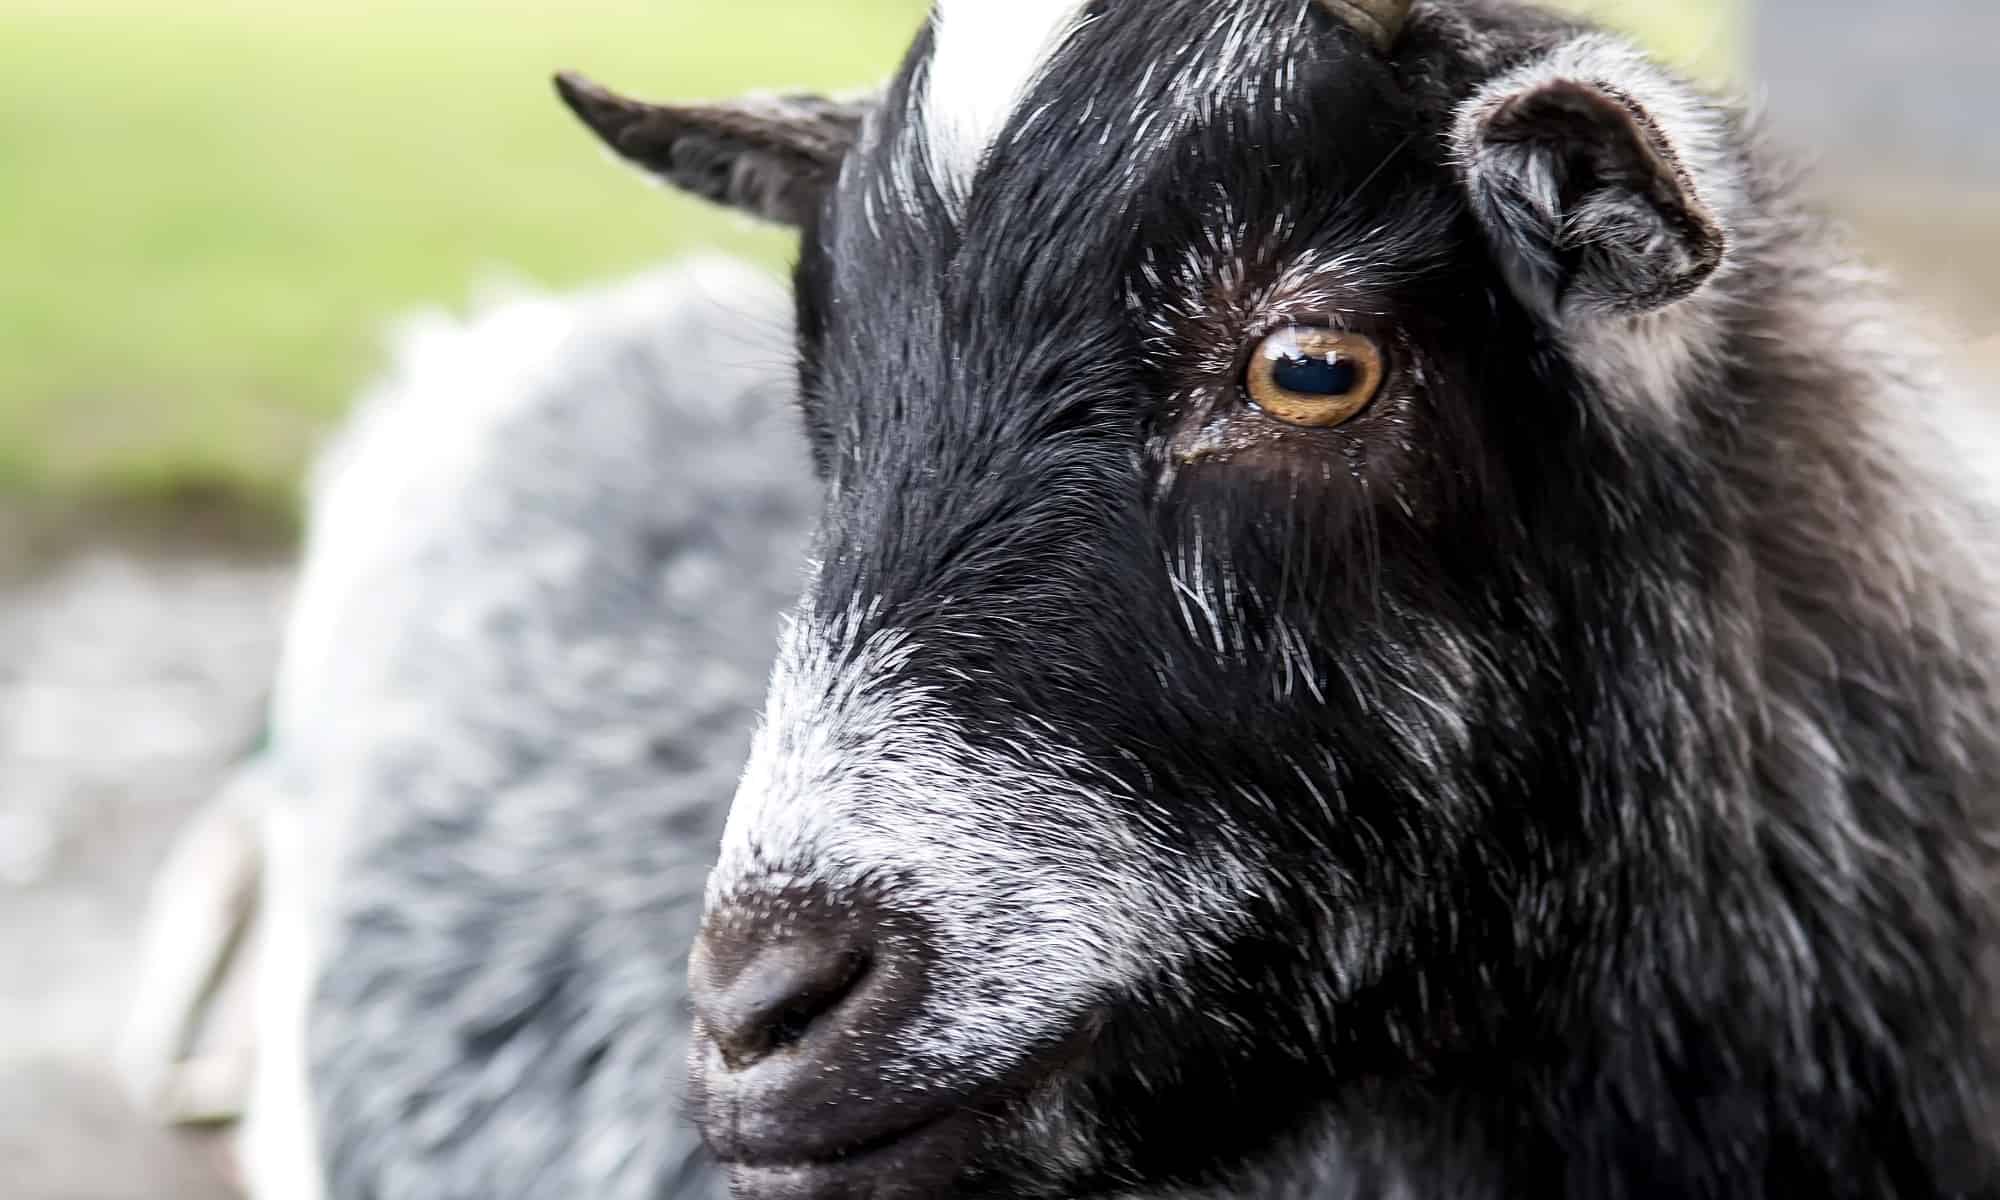 What Sound Does a Goat Make, and Why? - AZ Animals